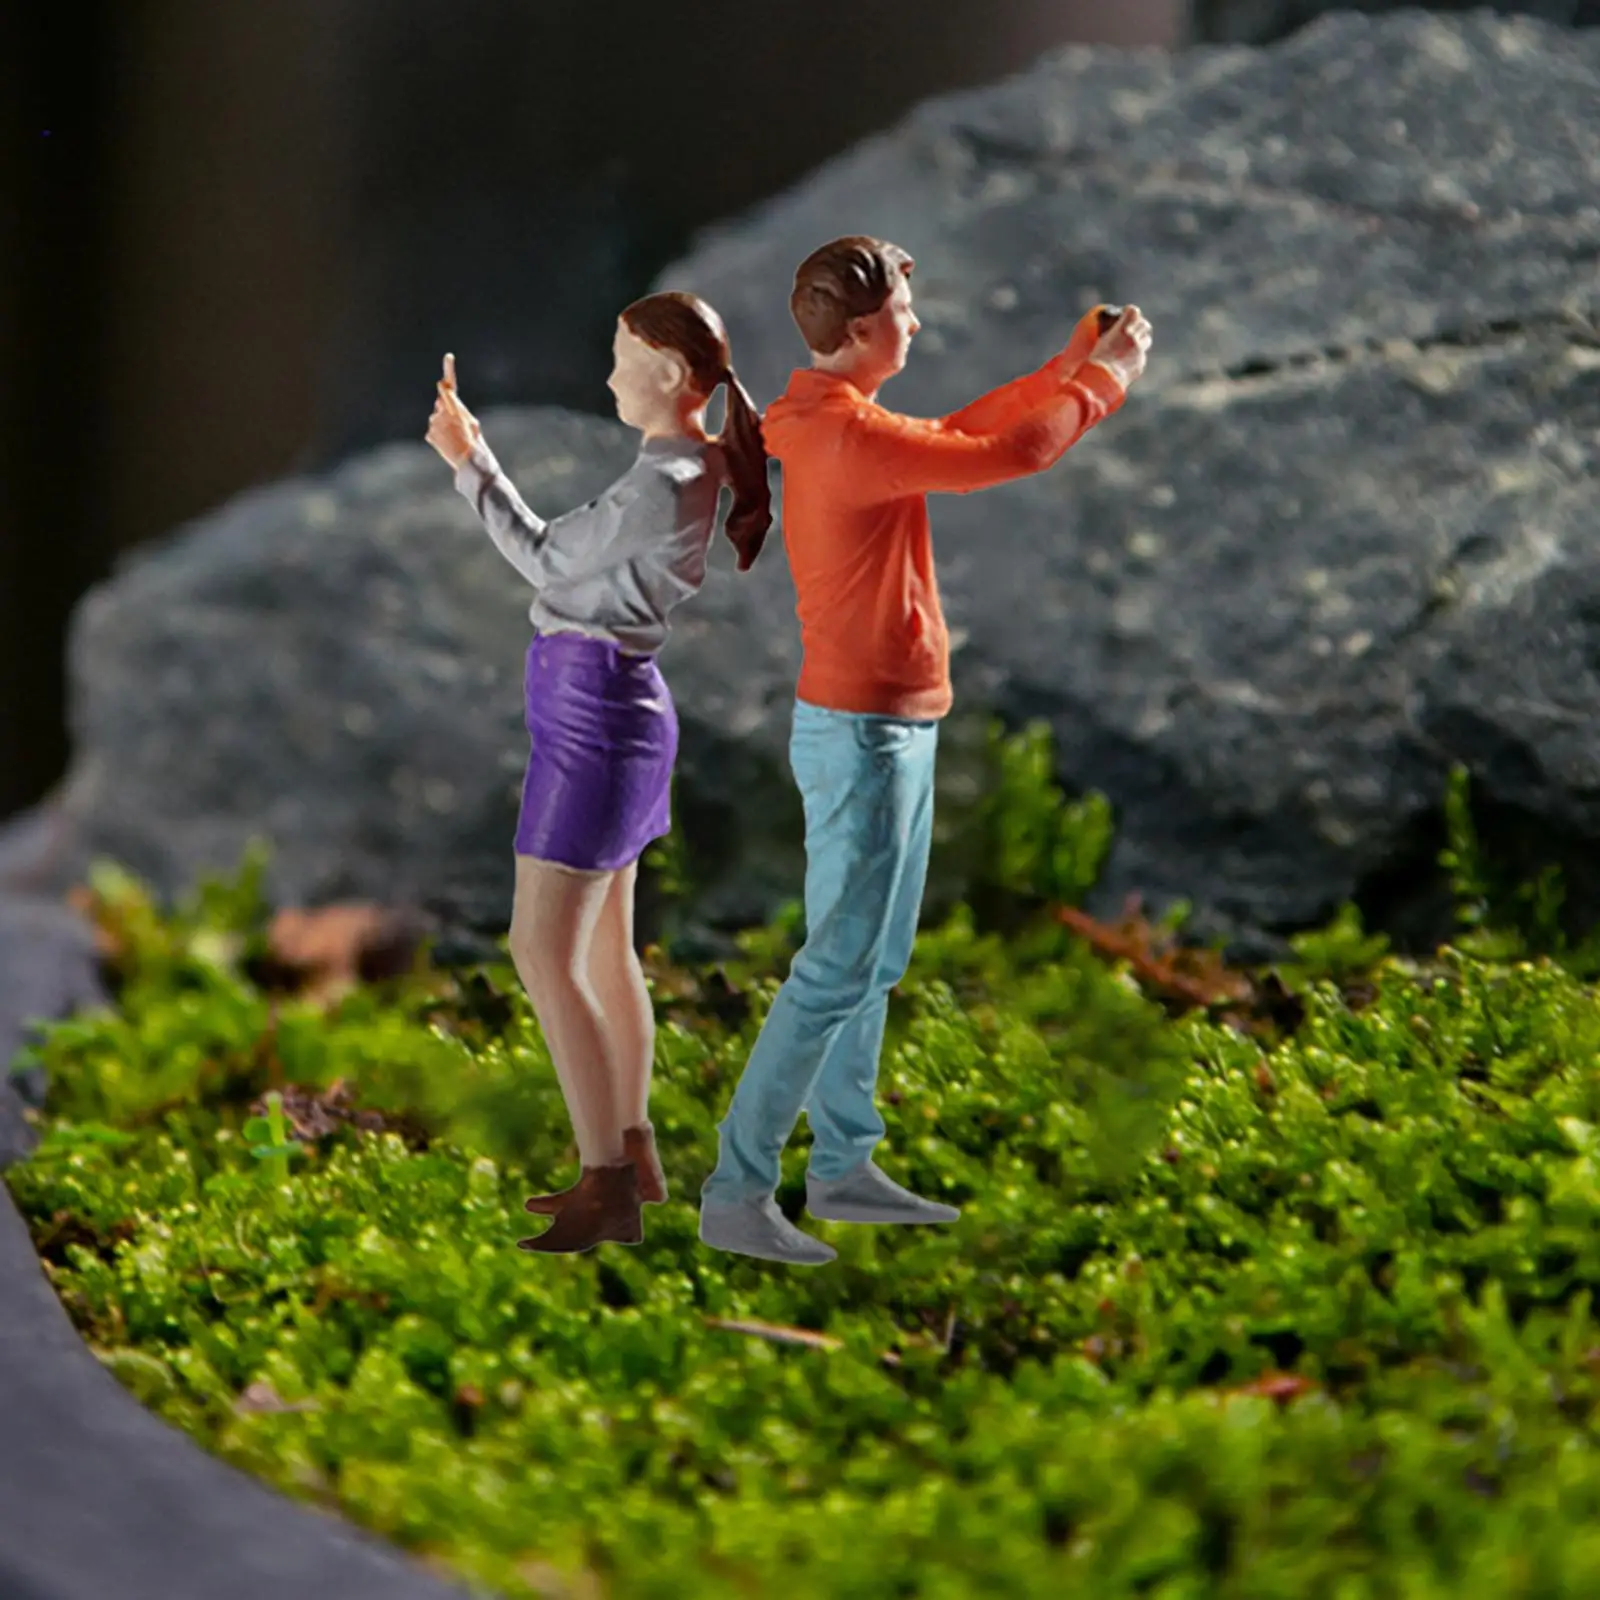 2x Simulation 1/64 Couple Figures Hand Painted Street Couple Figures for Diorama Scenery Landscape Photography Props Accessories